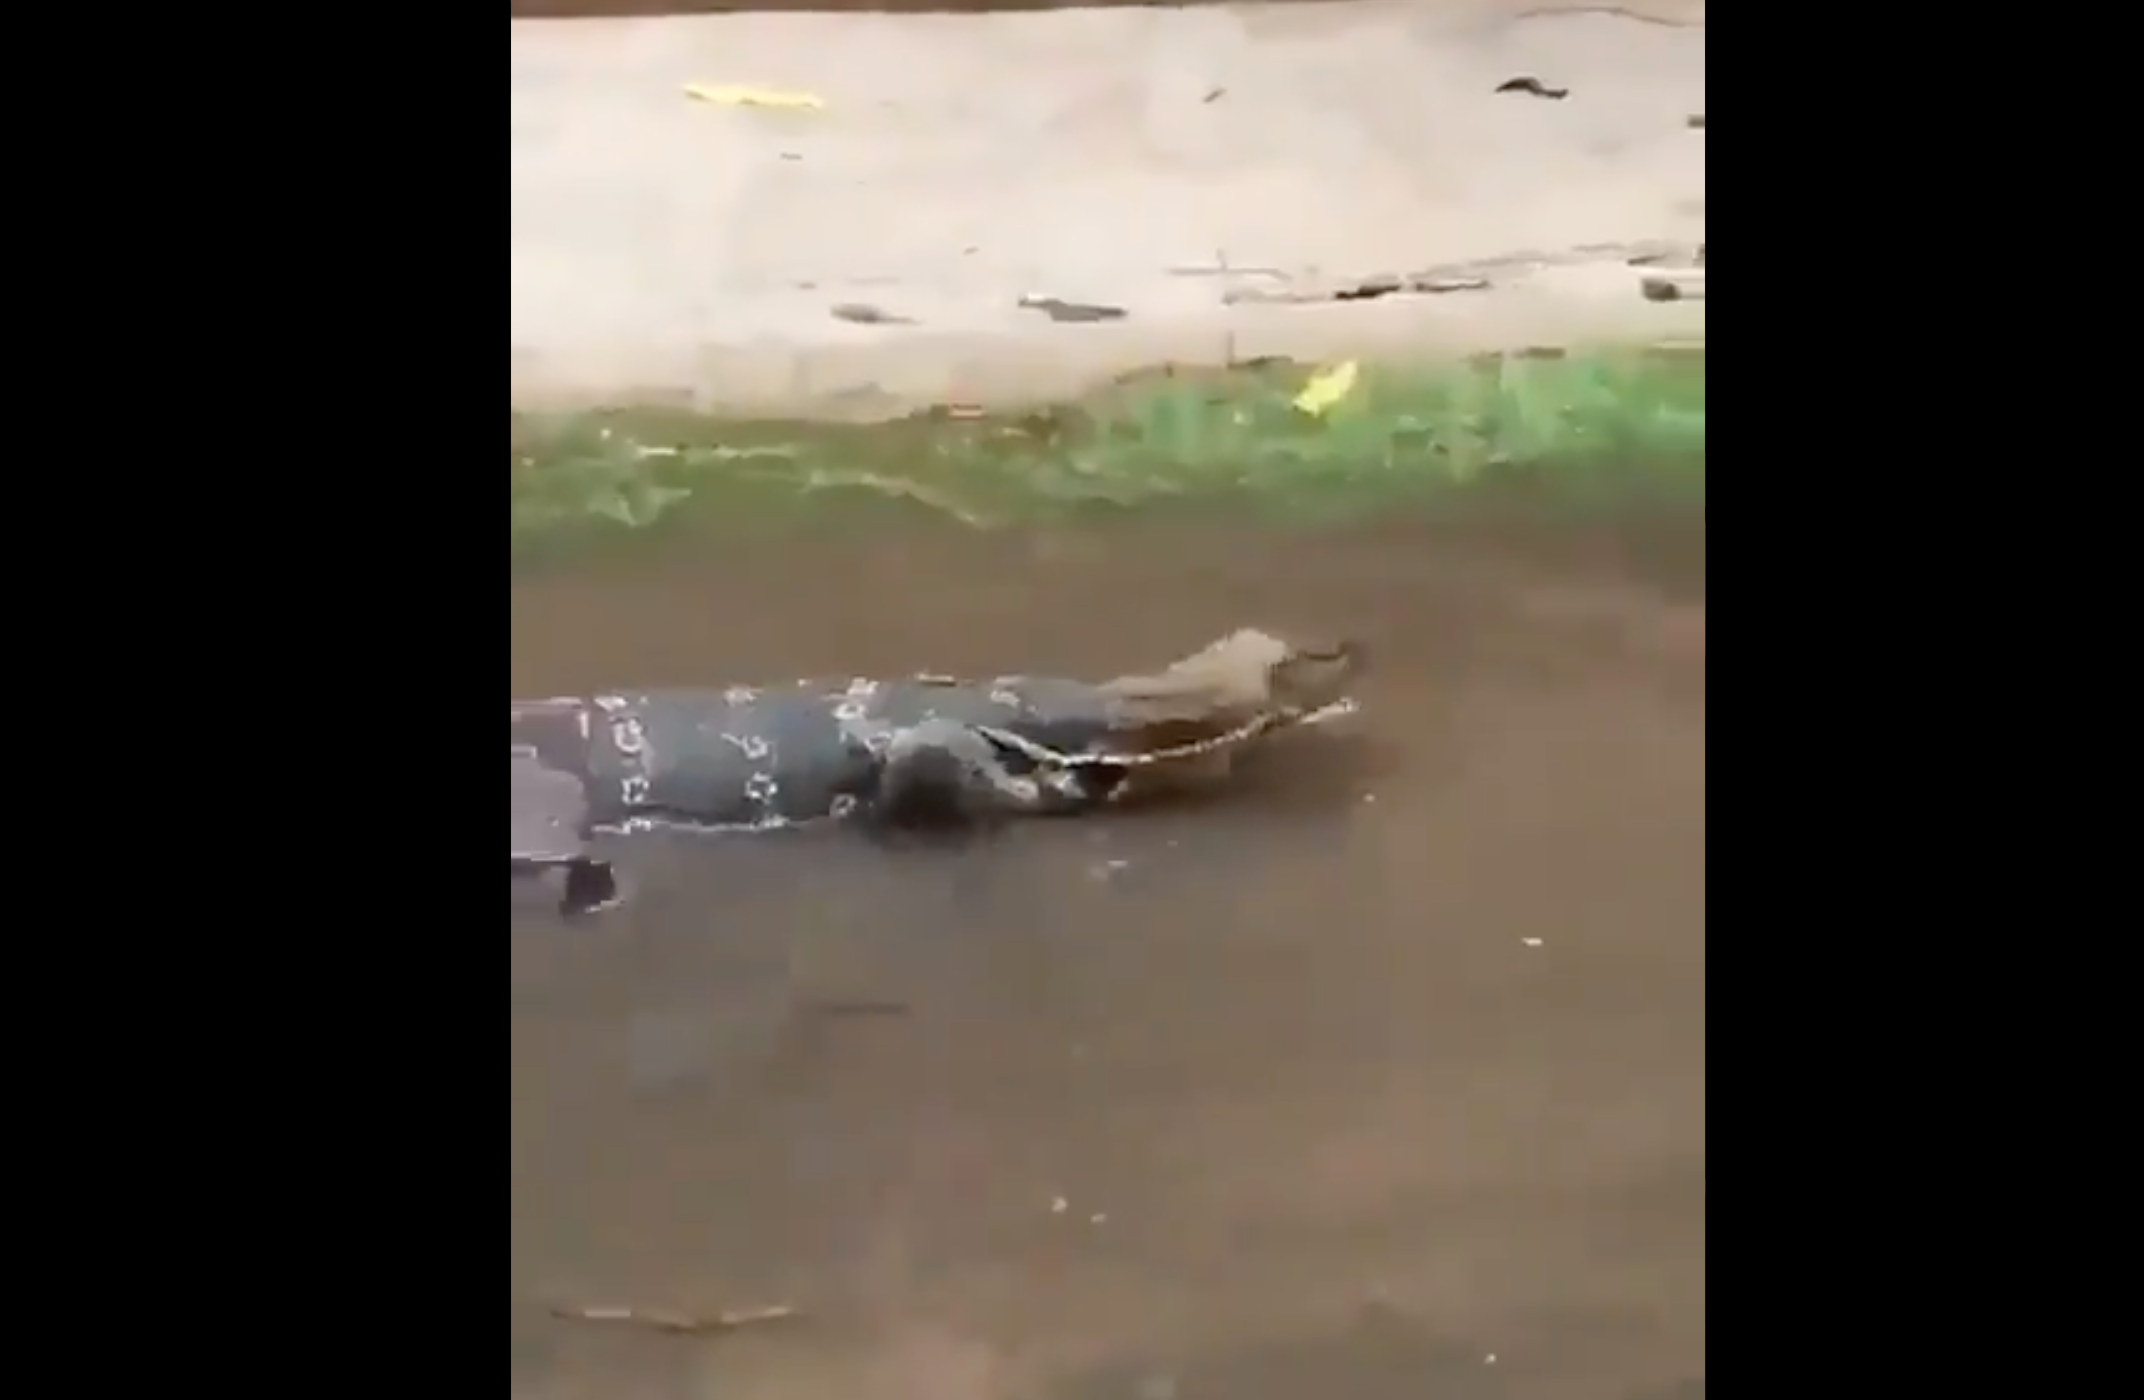 Screengrab from a video of a lizard strolling through a street in India.